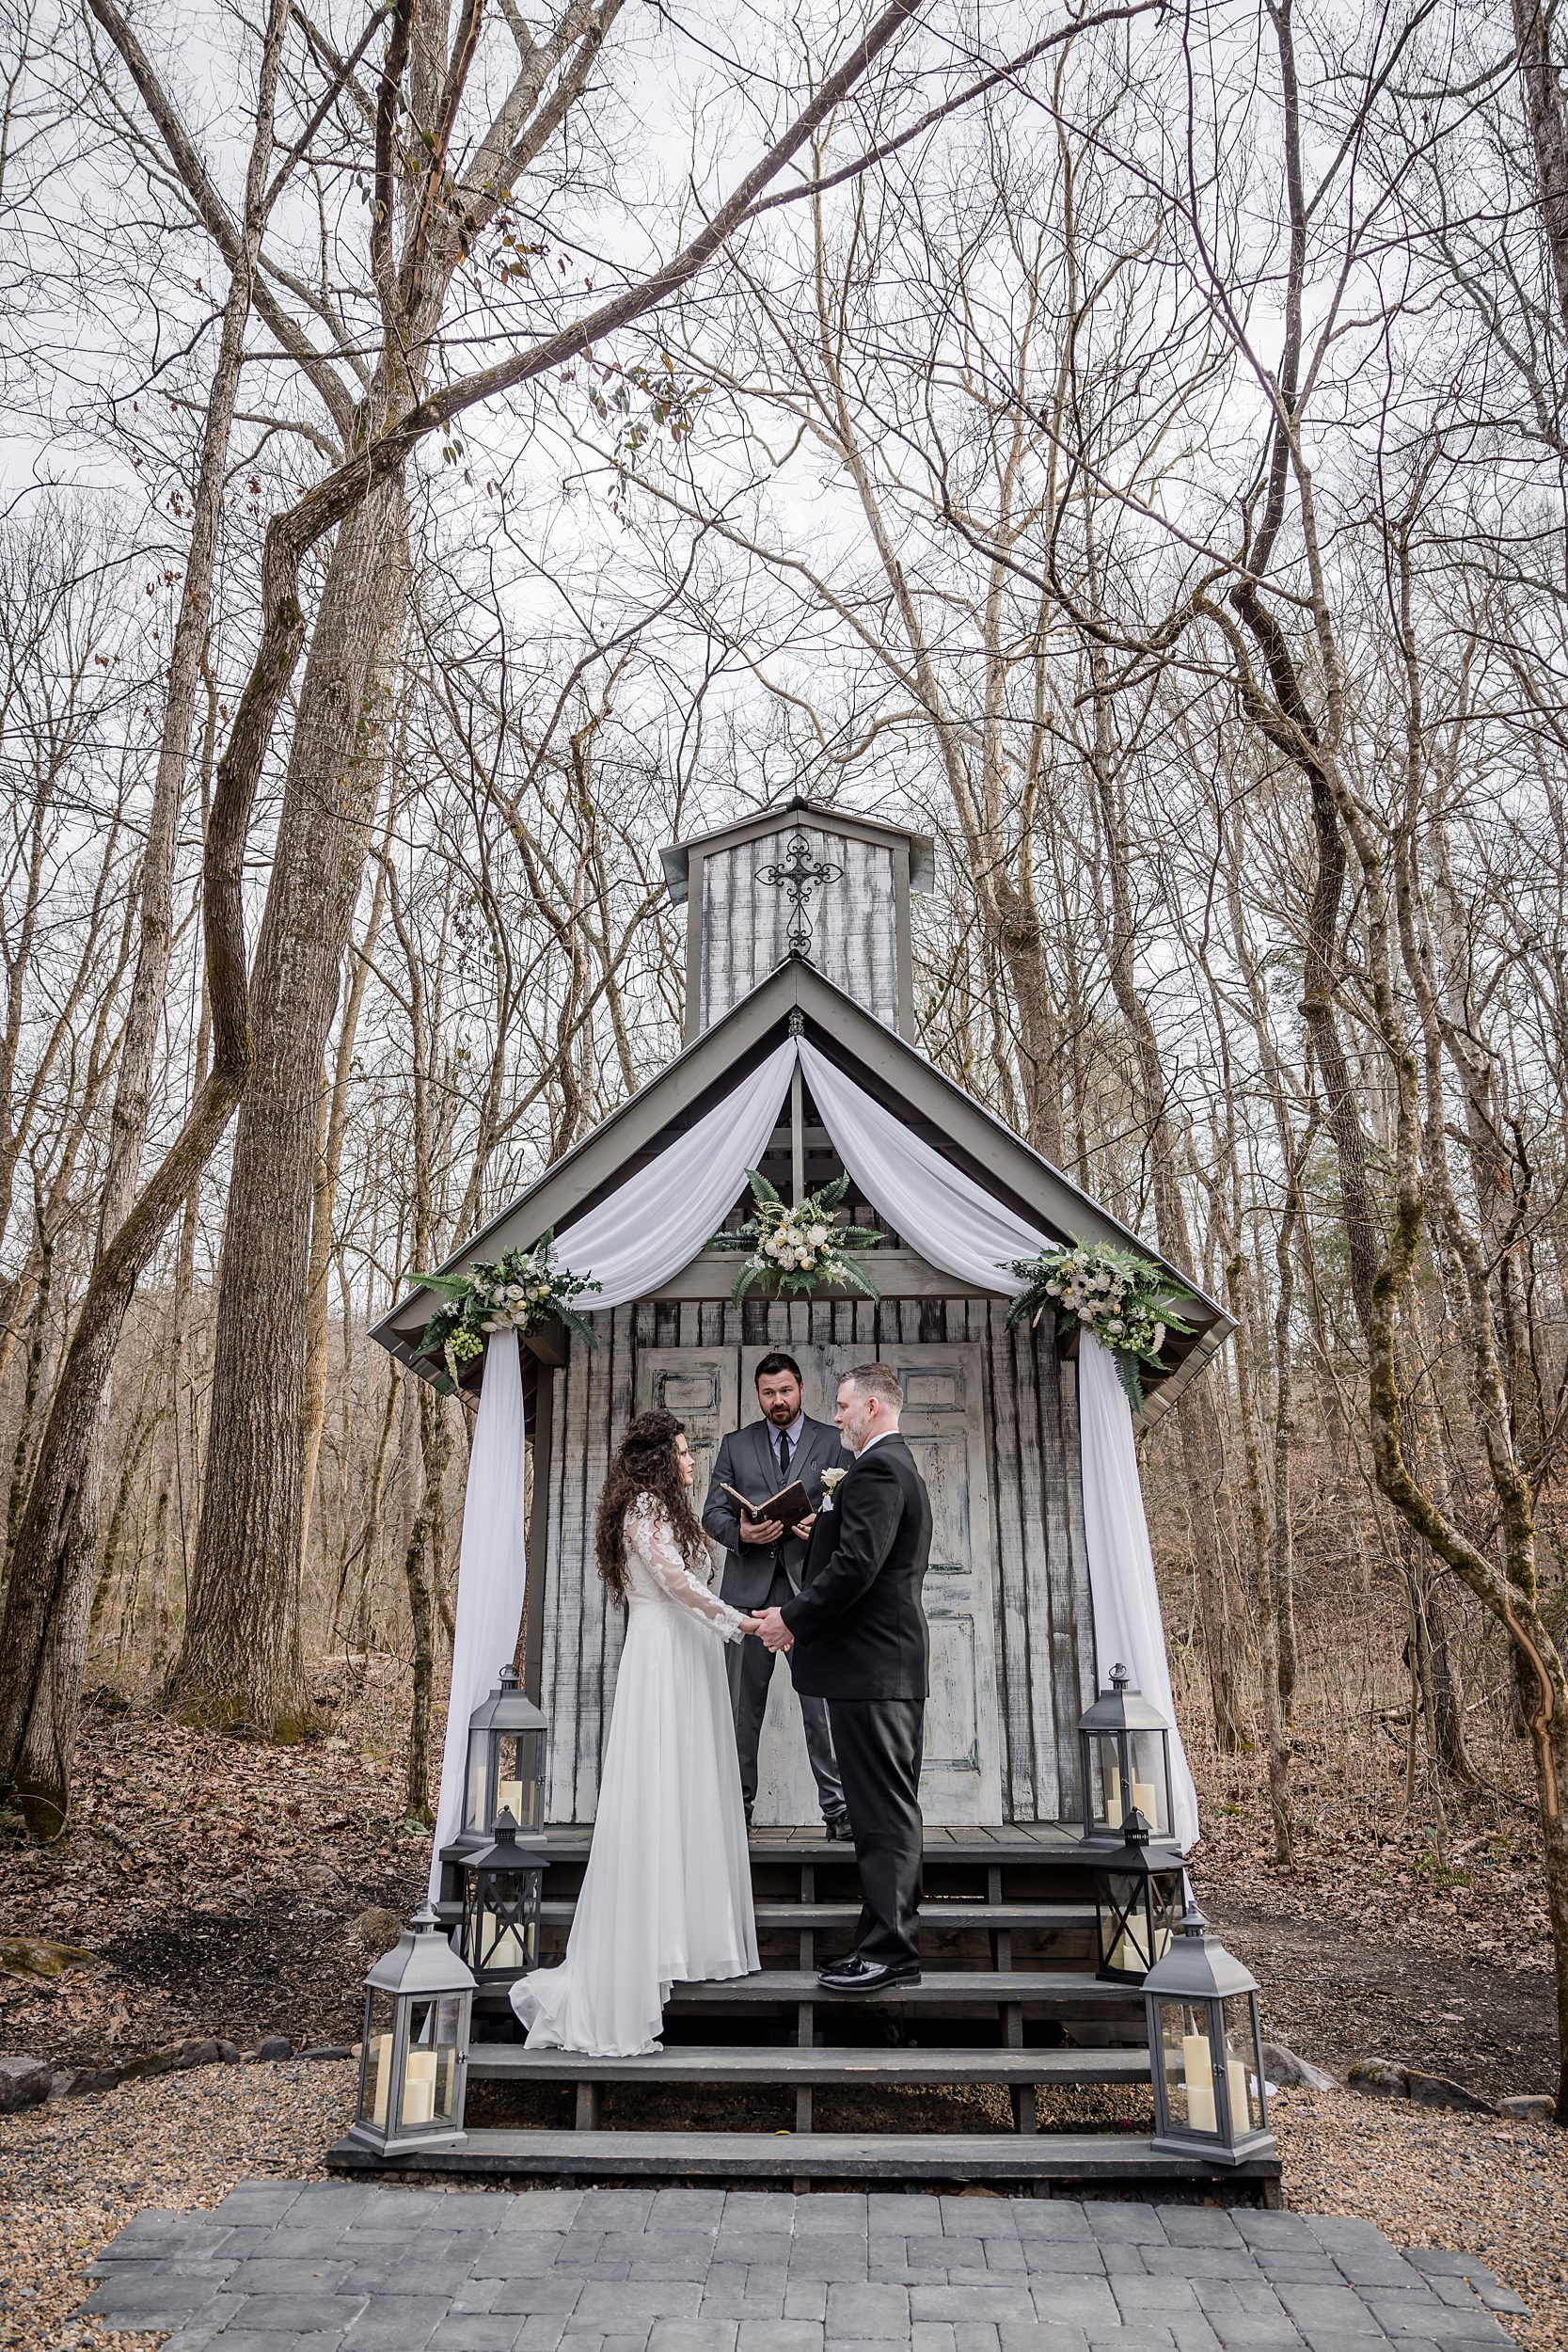 Traditional Micro Wedding in the Woods